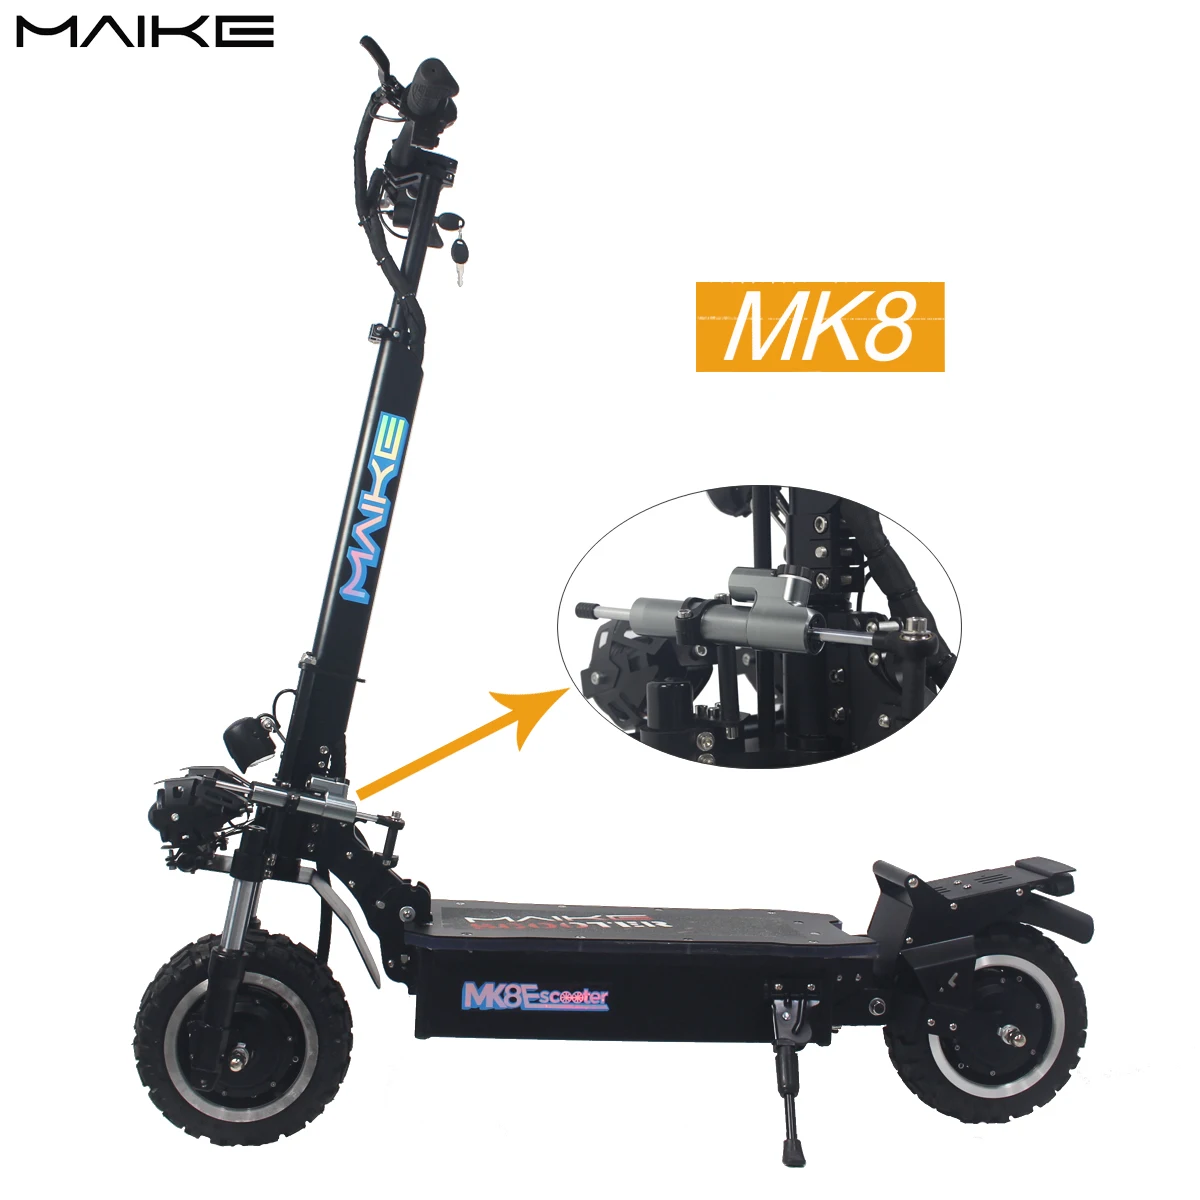 

Maike MK8 price china adult 1600W*2 two wheel foldable off road 3200W dual motor electric motorcycle scooter, Black